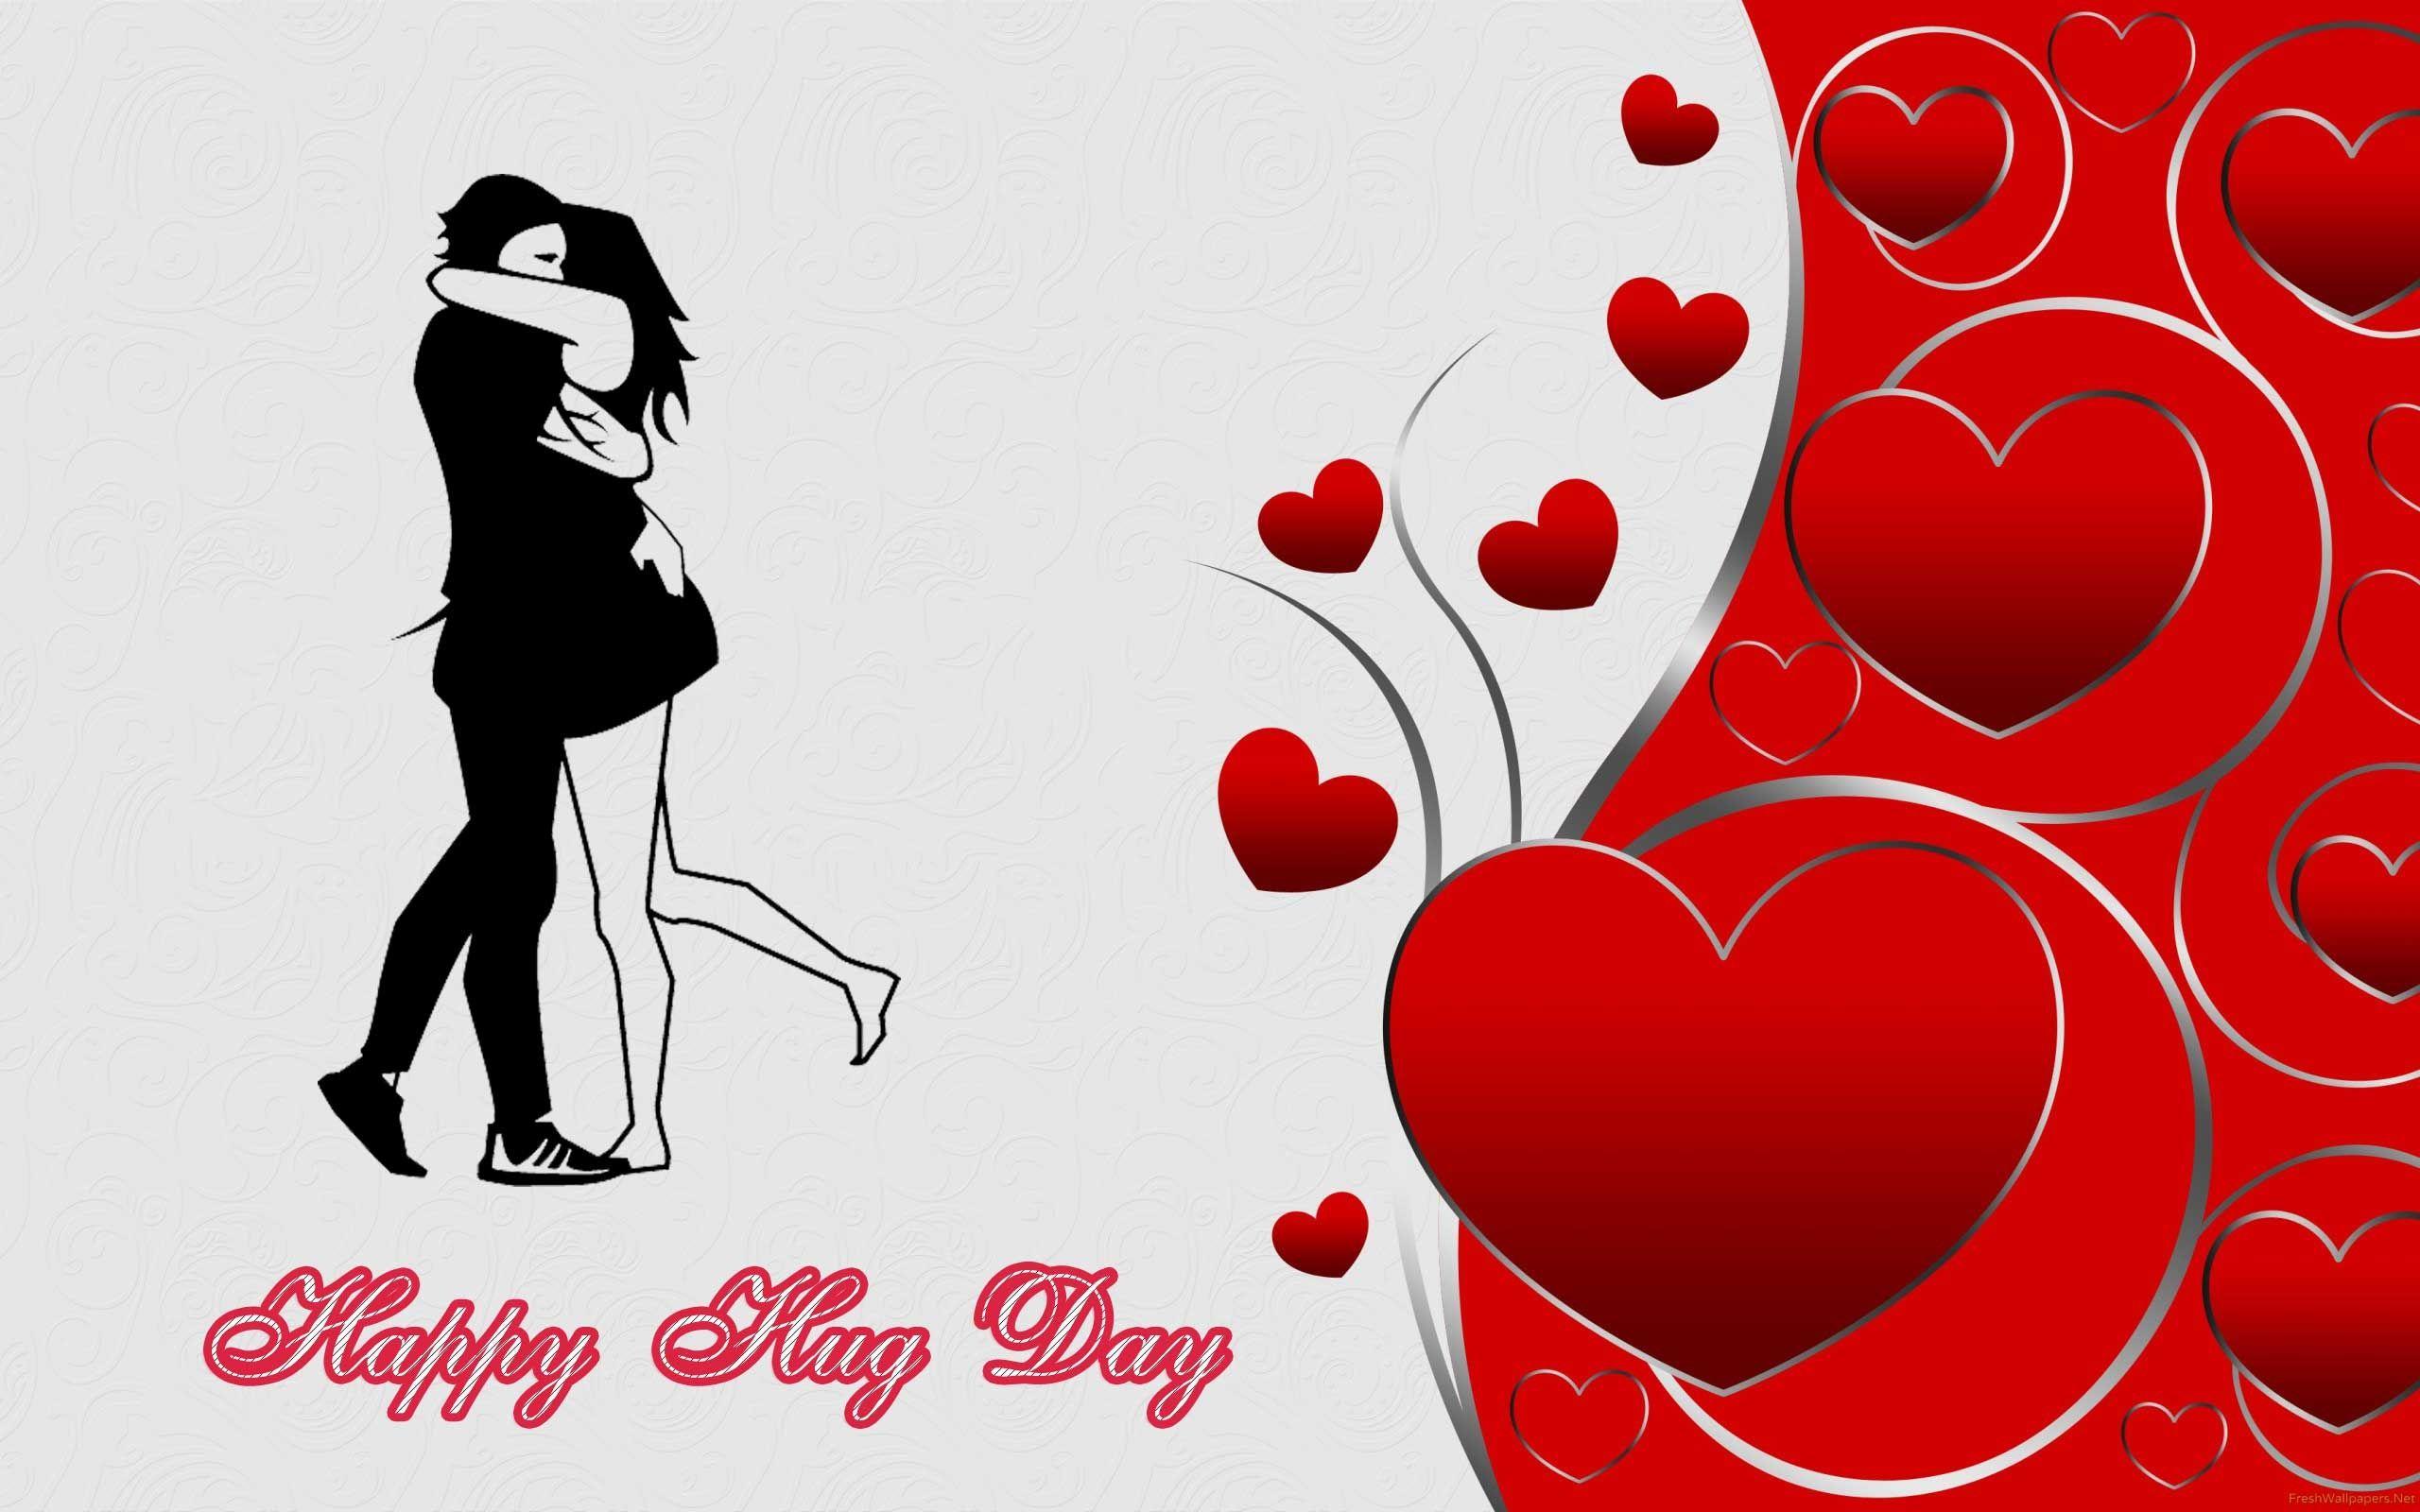 Happy Hug Day Wishes Love Romantic Couples Hearts Background Image